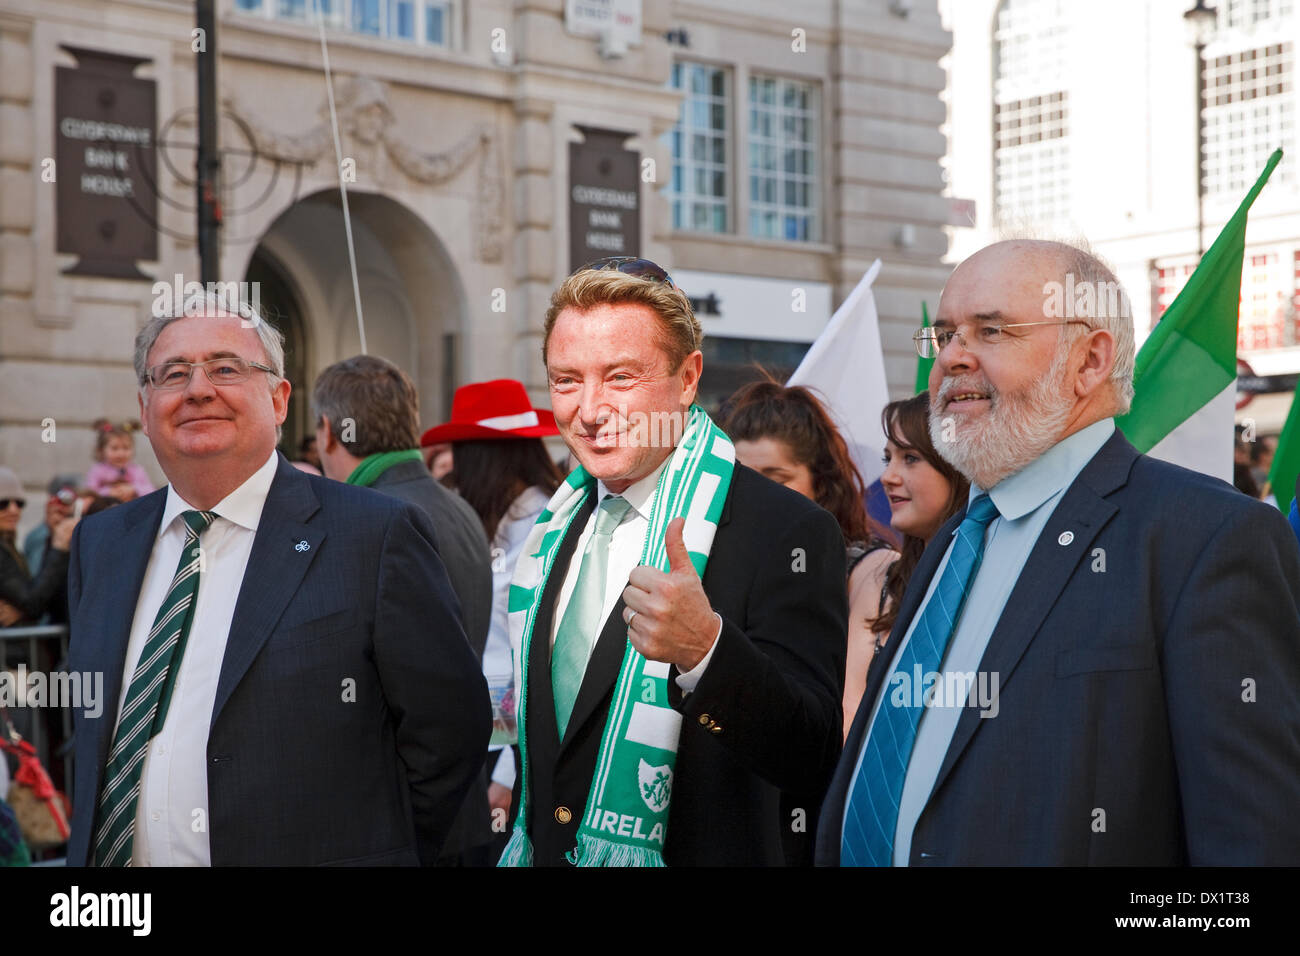 Michael Flatley of Riverdance fame lead the St Patrick's Day 2014 parade in London Stock Photo